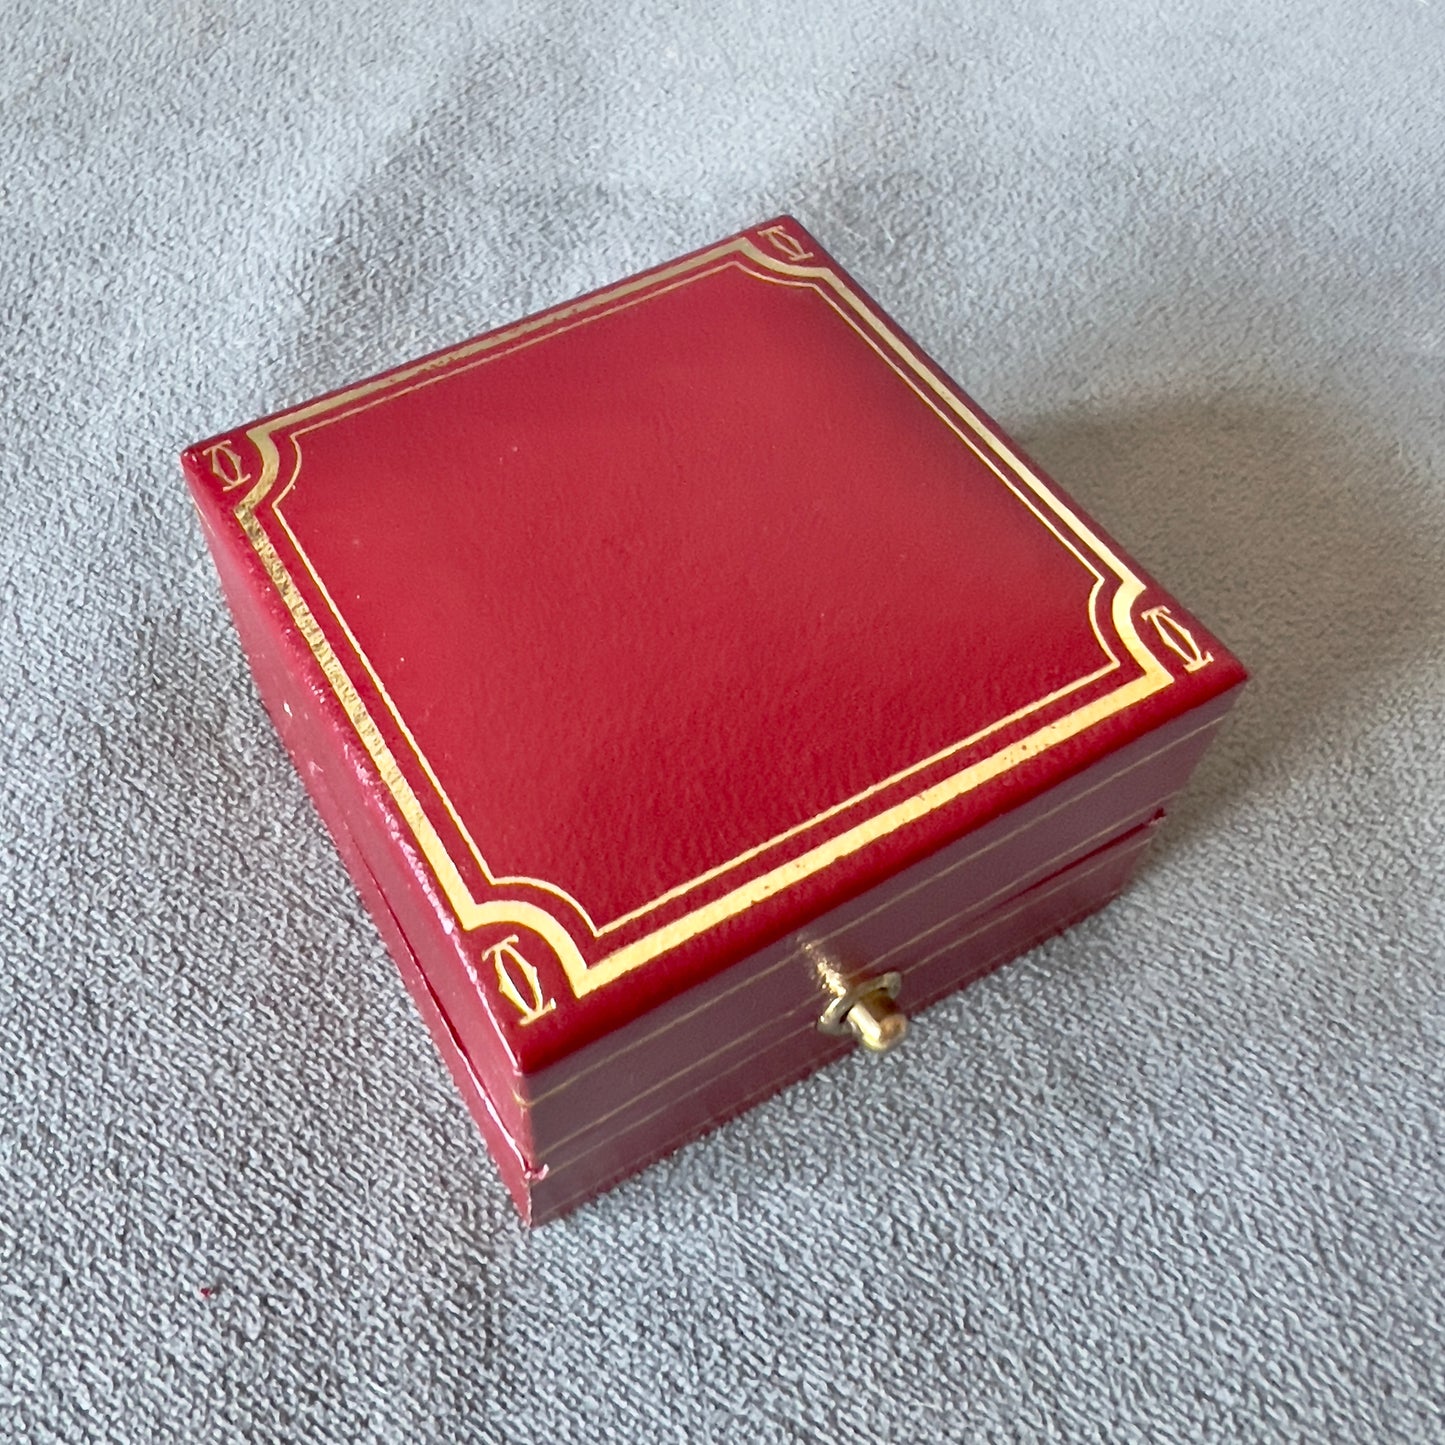 CARTIER TRINITY Ring Box 2x2x1.25 inches